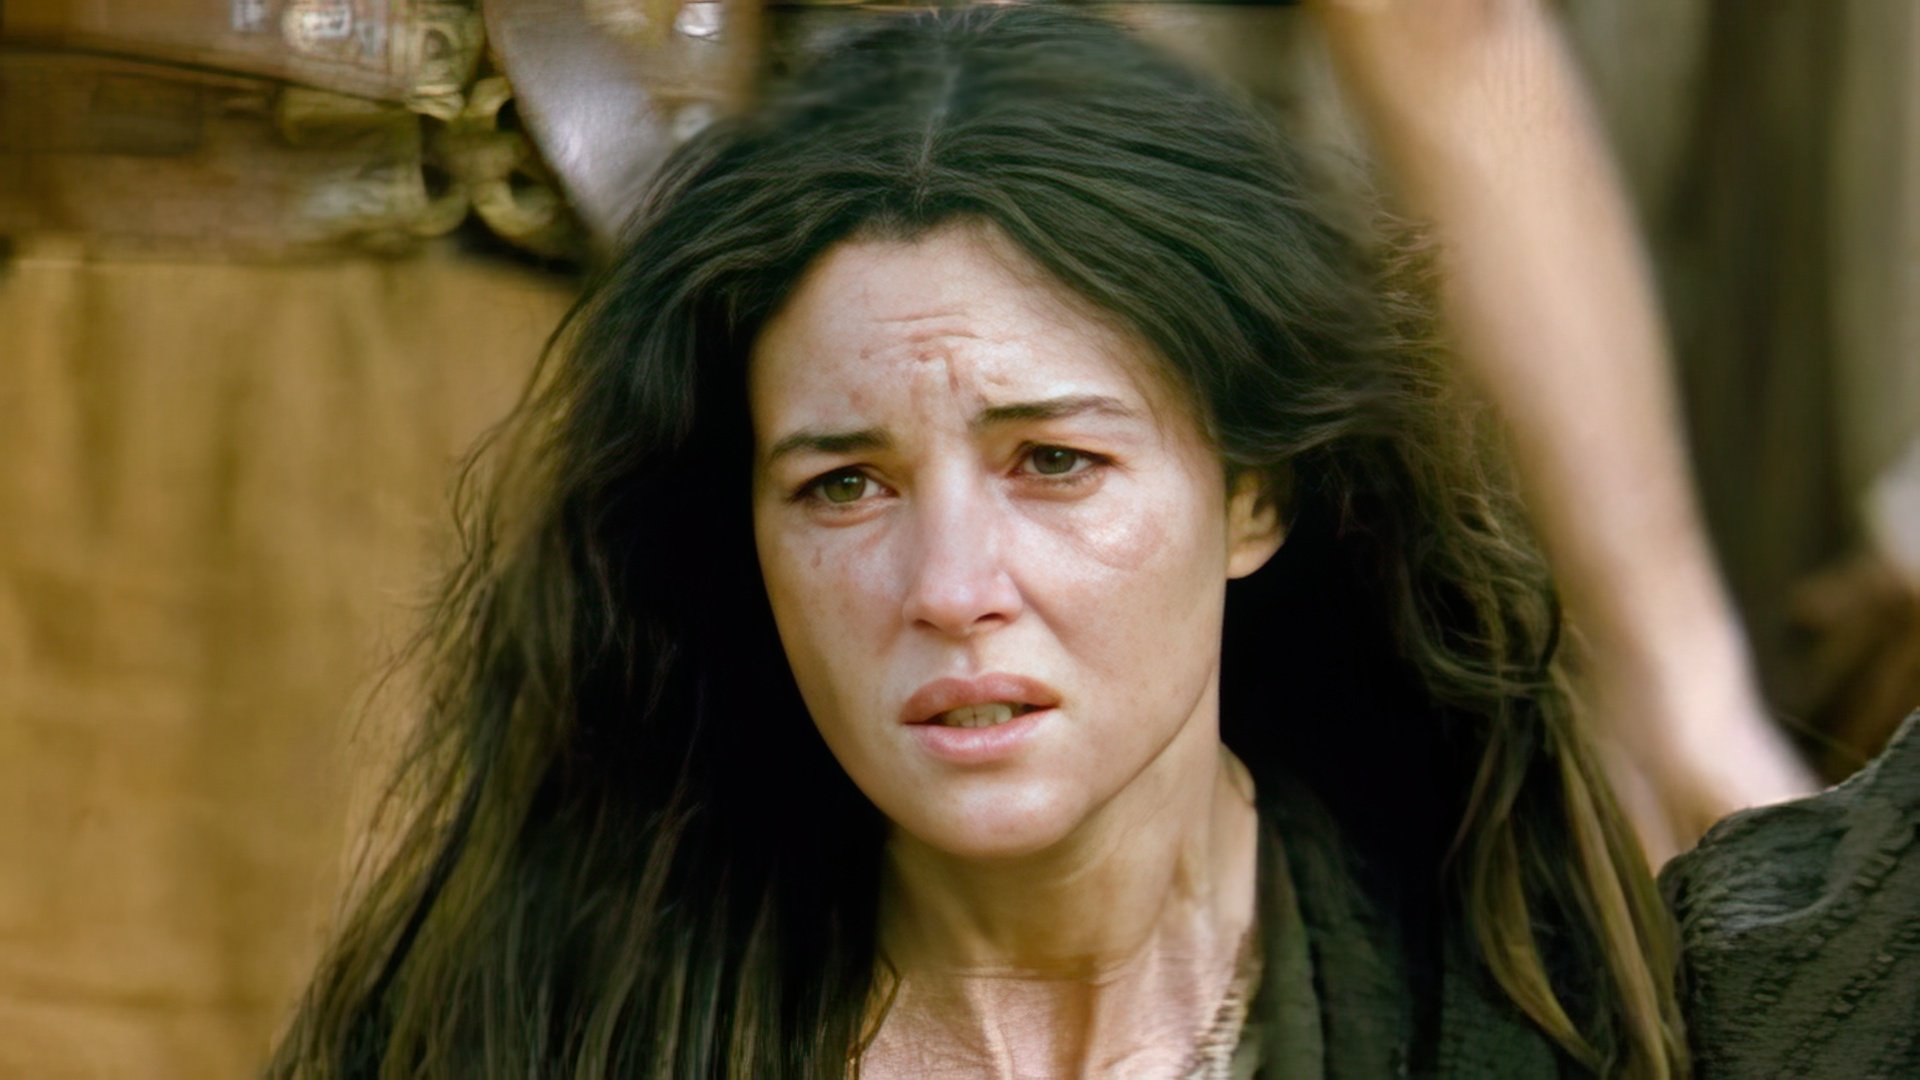 A frame from the movie The Passion of Christ